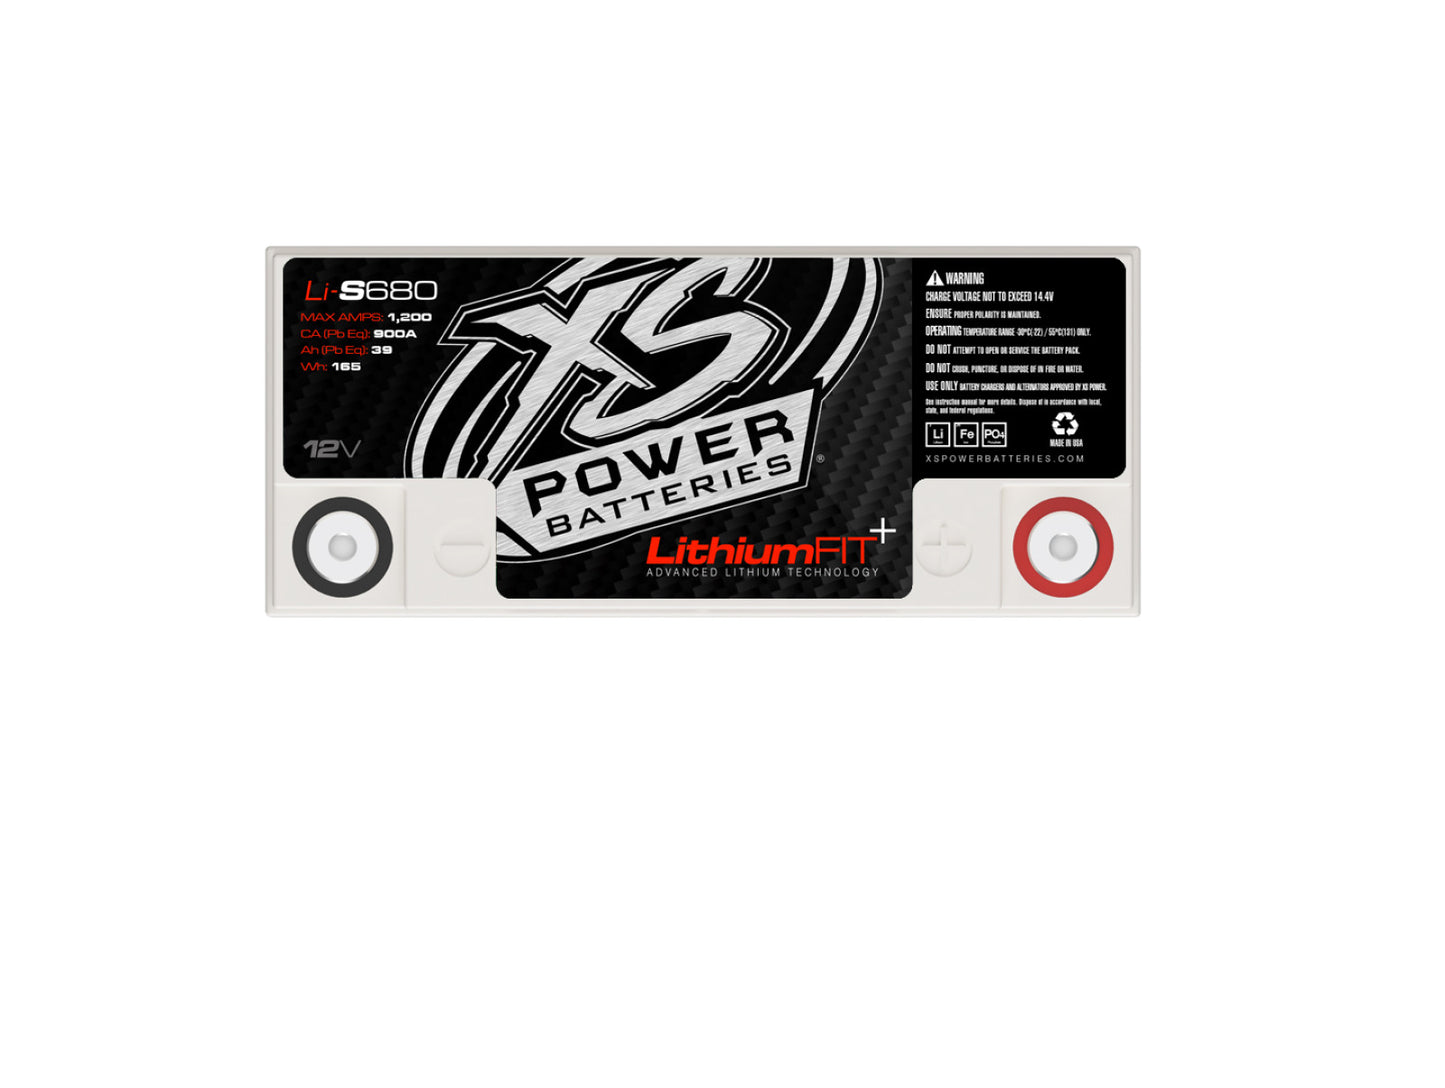 XS Power Batteries Lithium Racing 12V Batteries - M6 Terminal Bolts Included 1200 Max Amps Li-S680